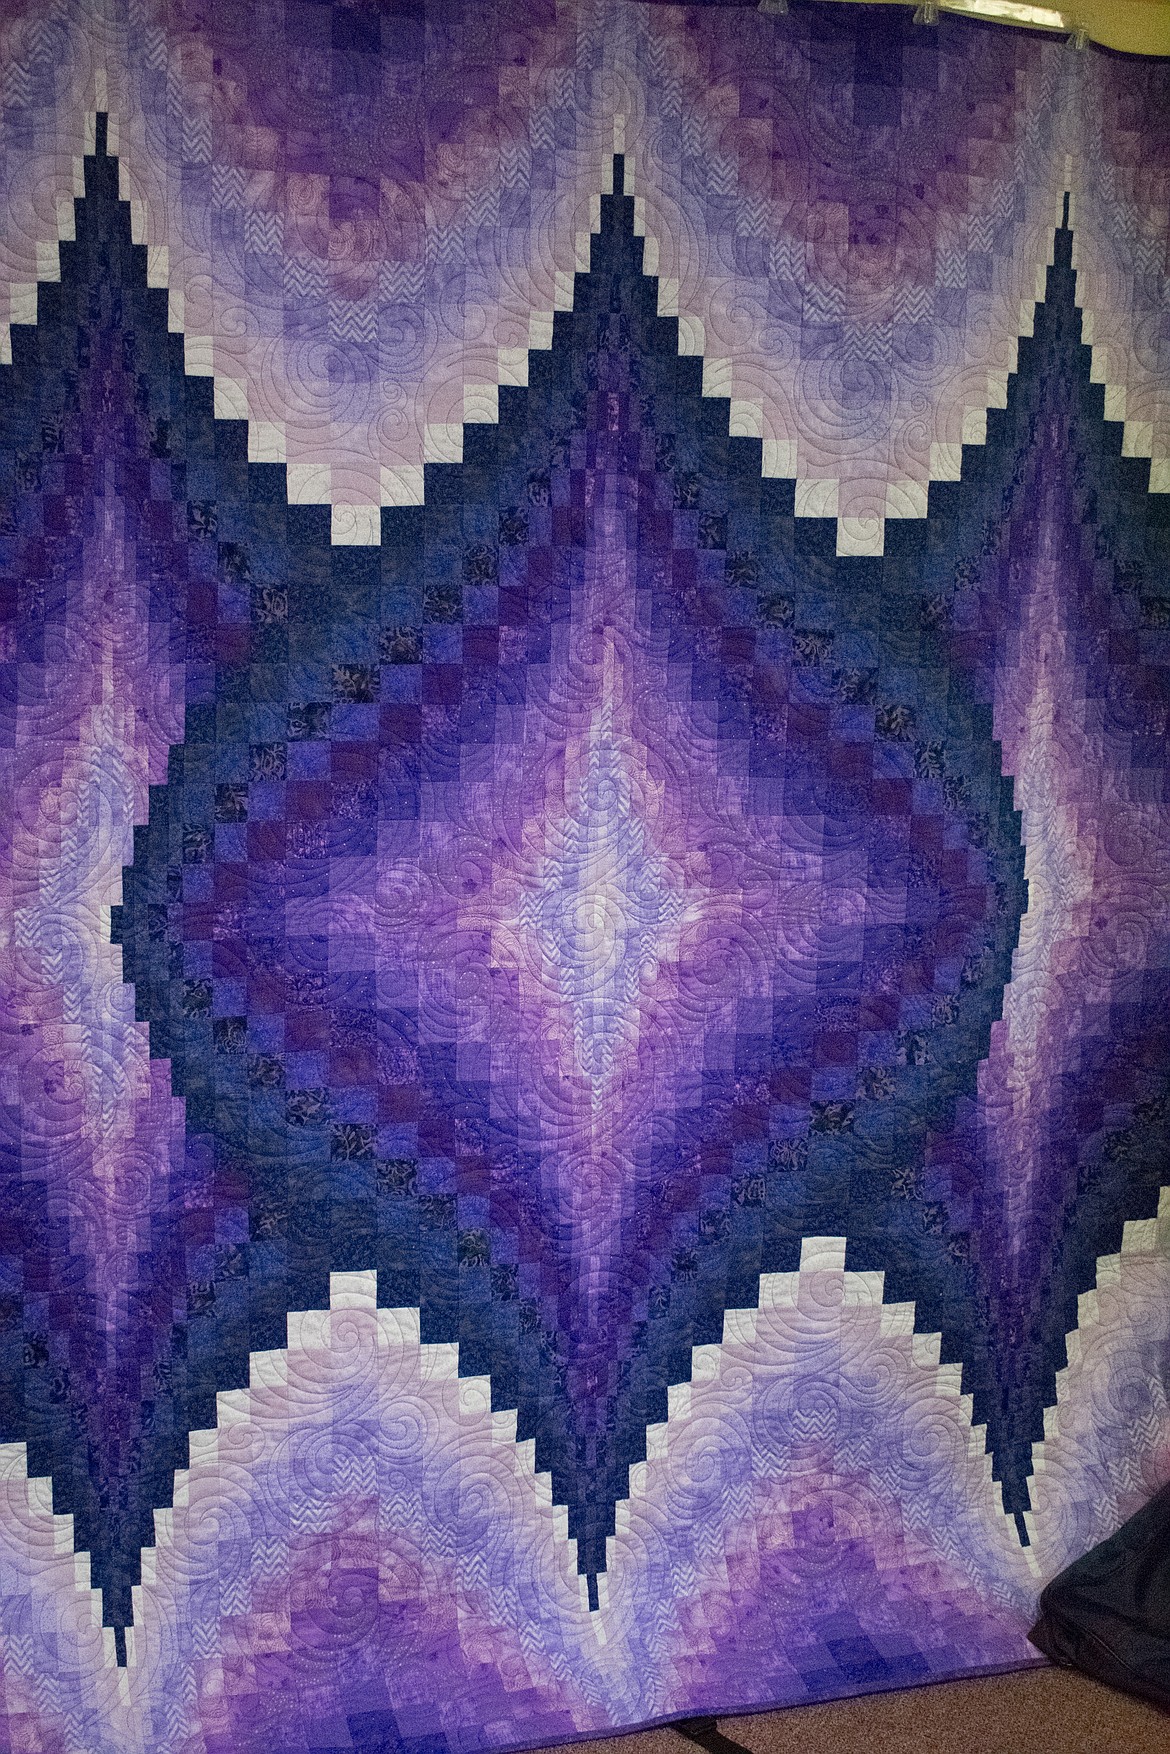 &#147;Purple Mountains Majesty,&#148; a quilt being raffled by the Tender Lovin&#146; Quilters of Troy.